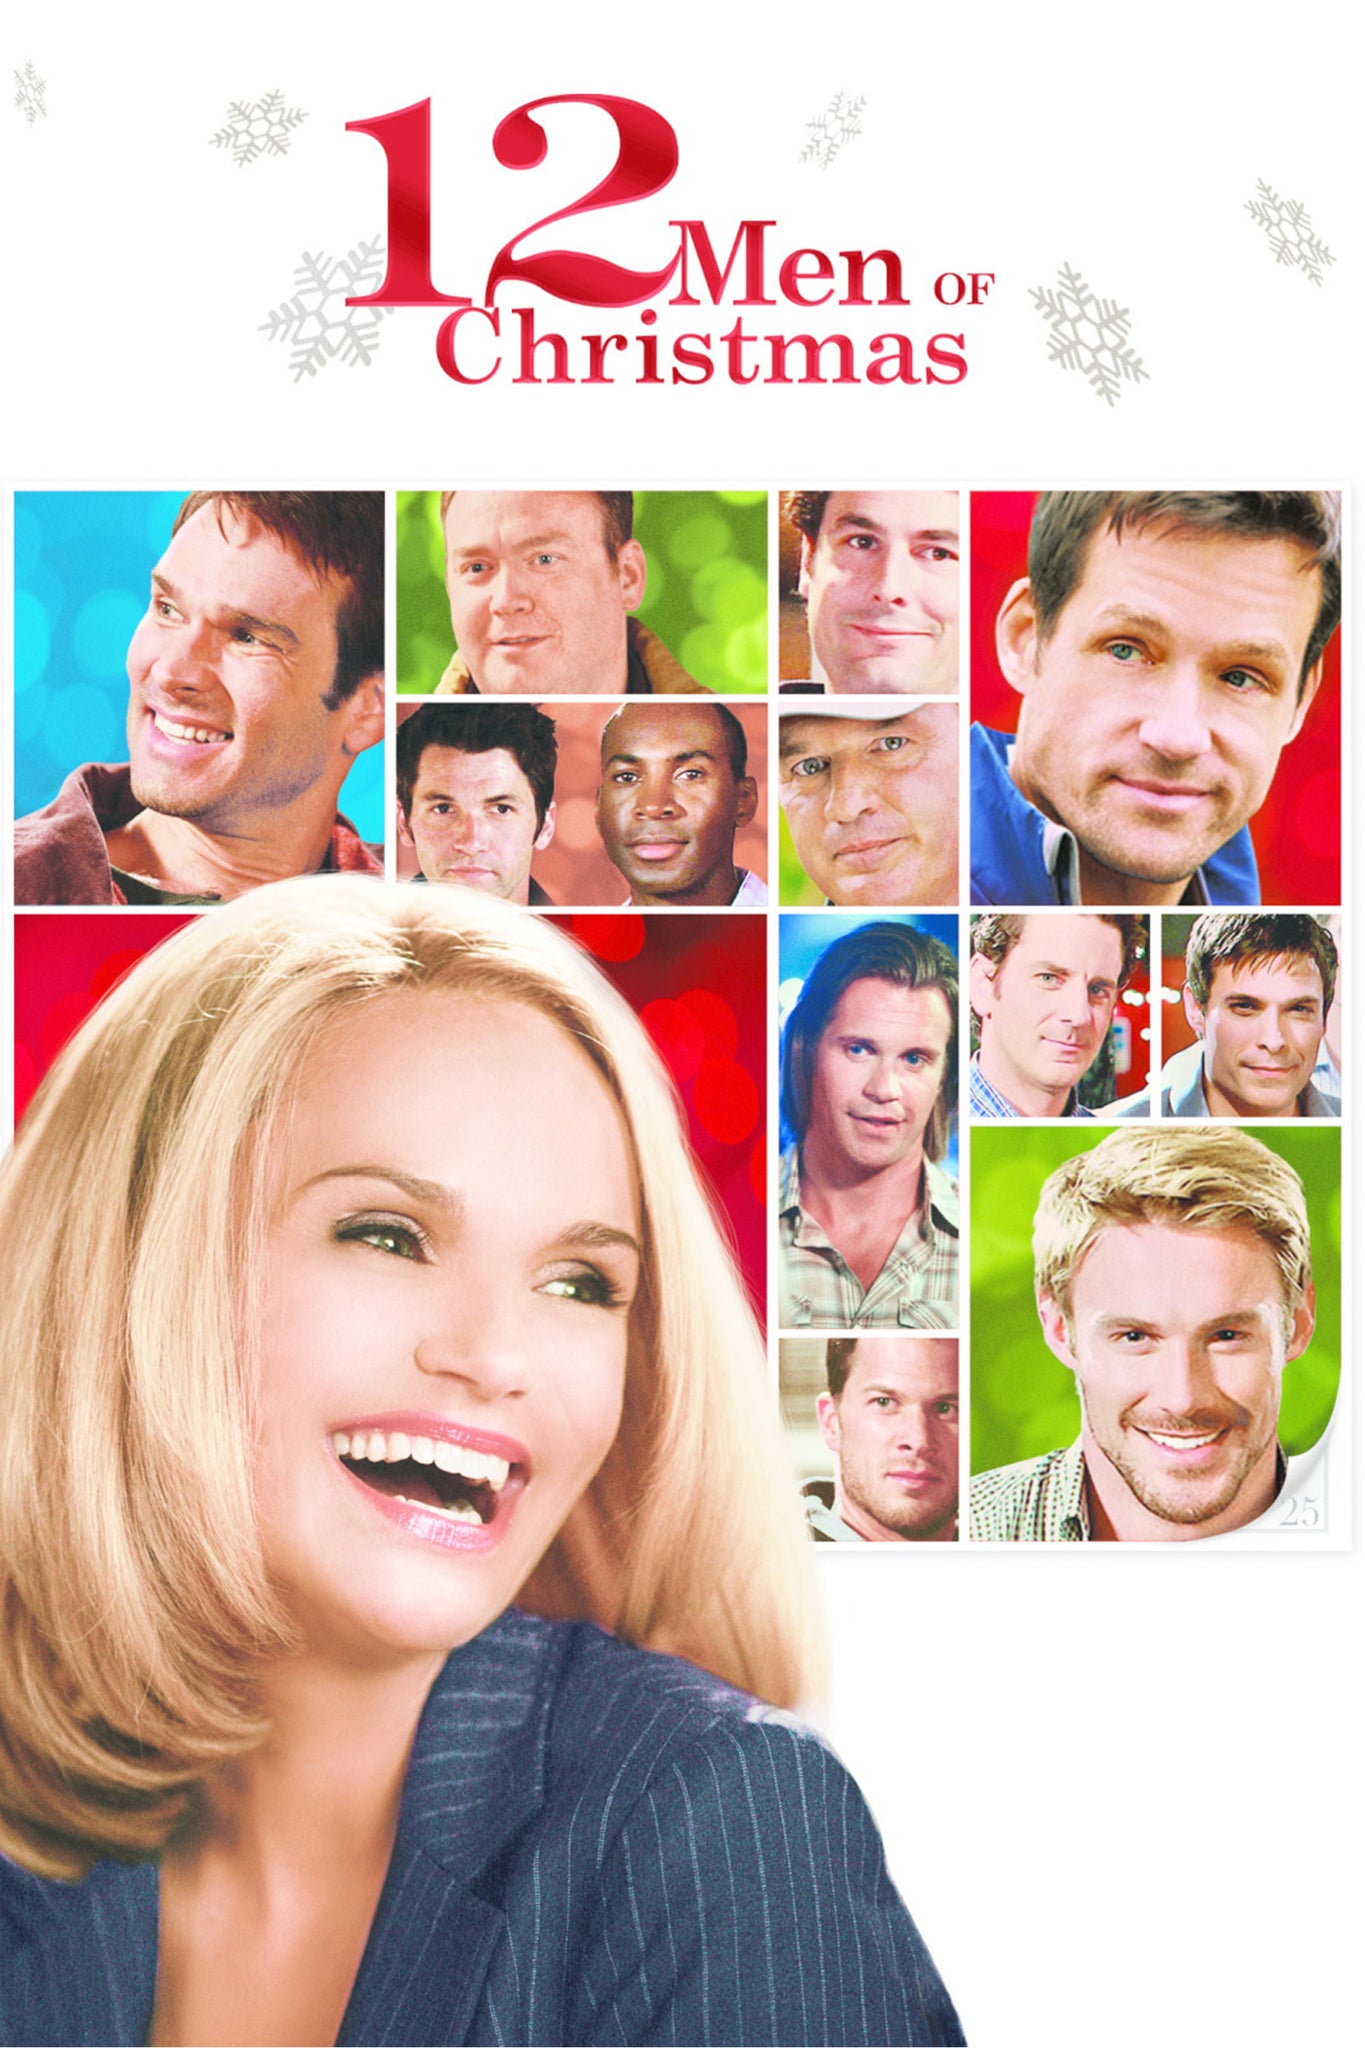 12 Men of Christmas – Voice pictures